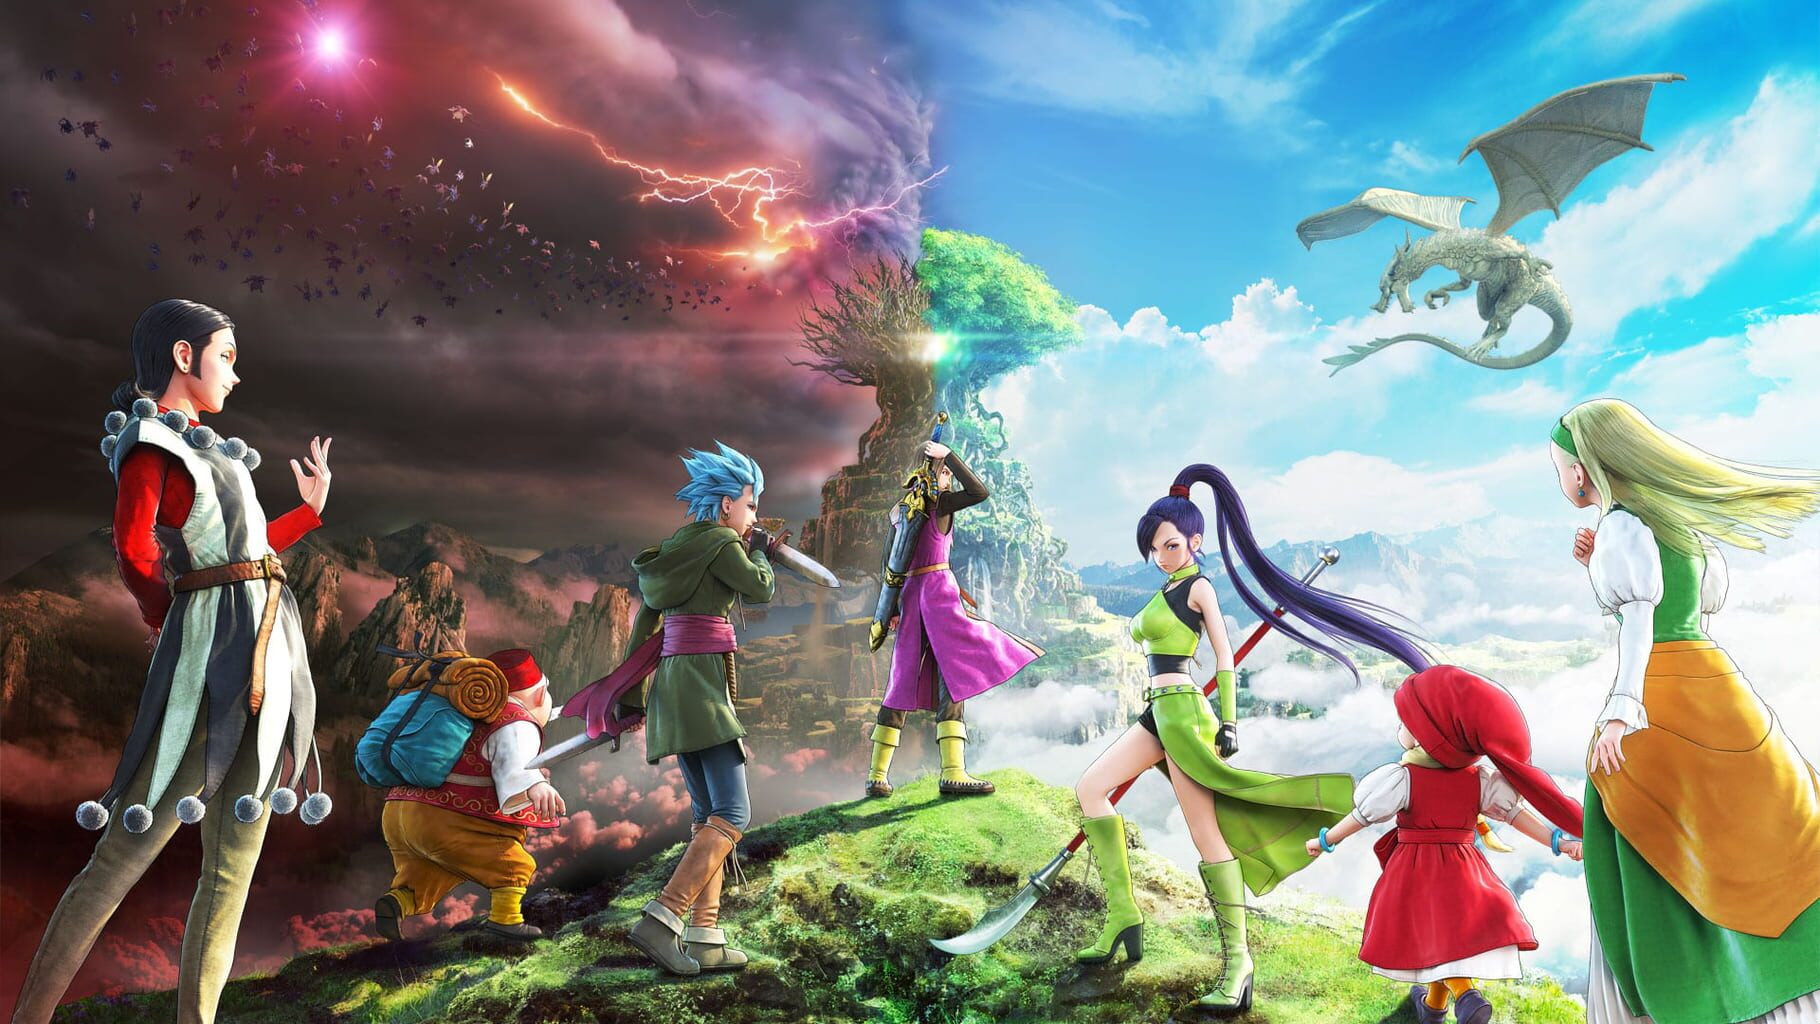 Arte - Dragon Quest XI S: Echoes of an Elusive Age - Definitive Edition